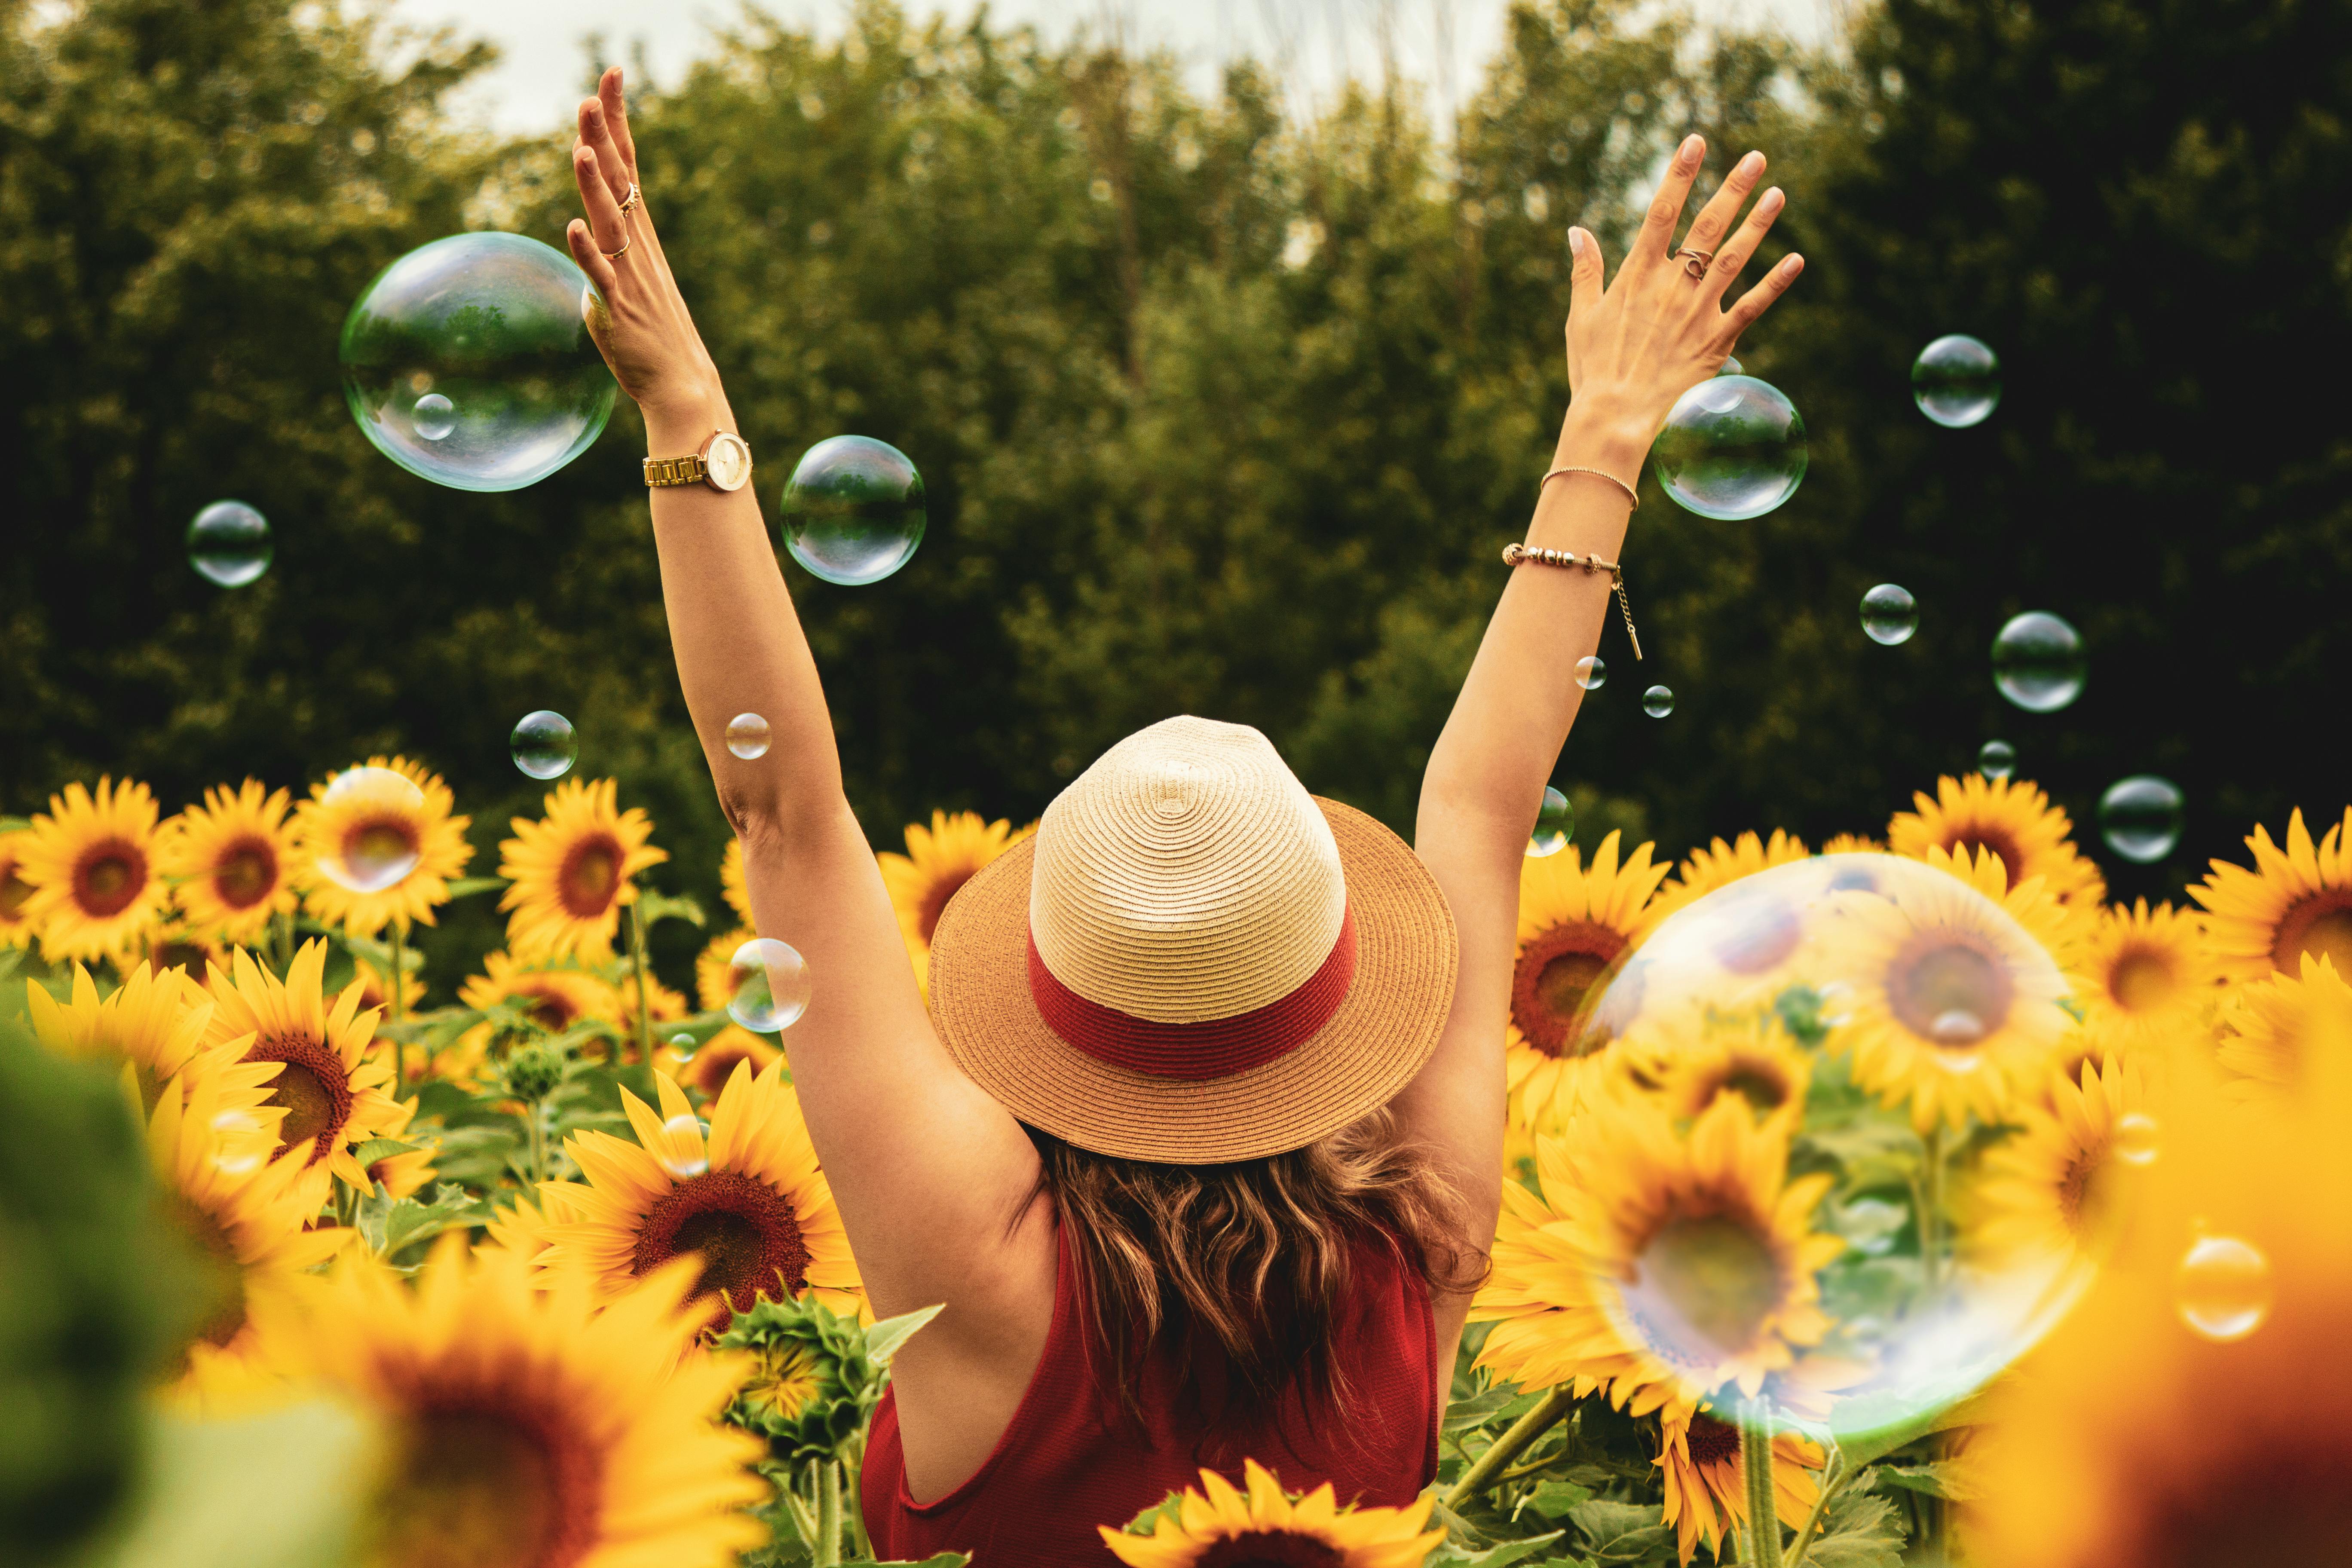 A happy woman in a filed of sunflowers | Source: Pexels